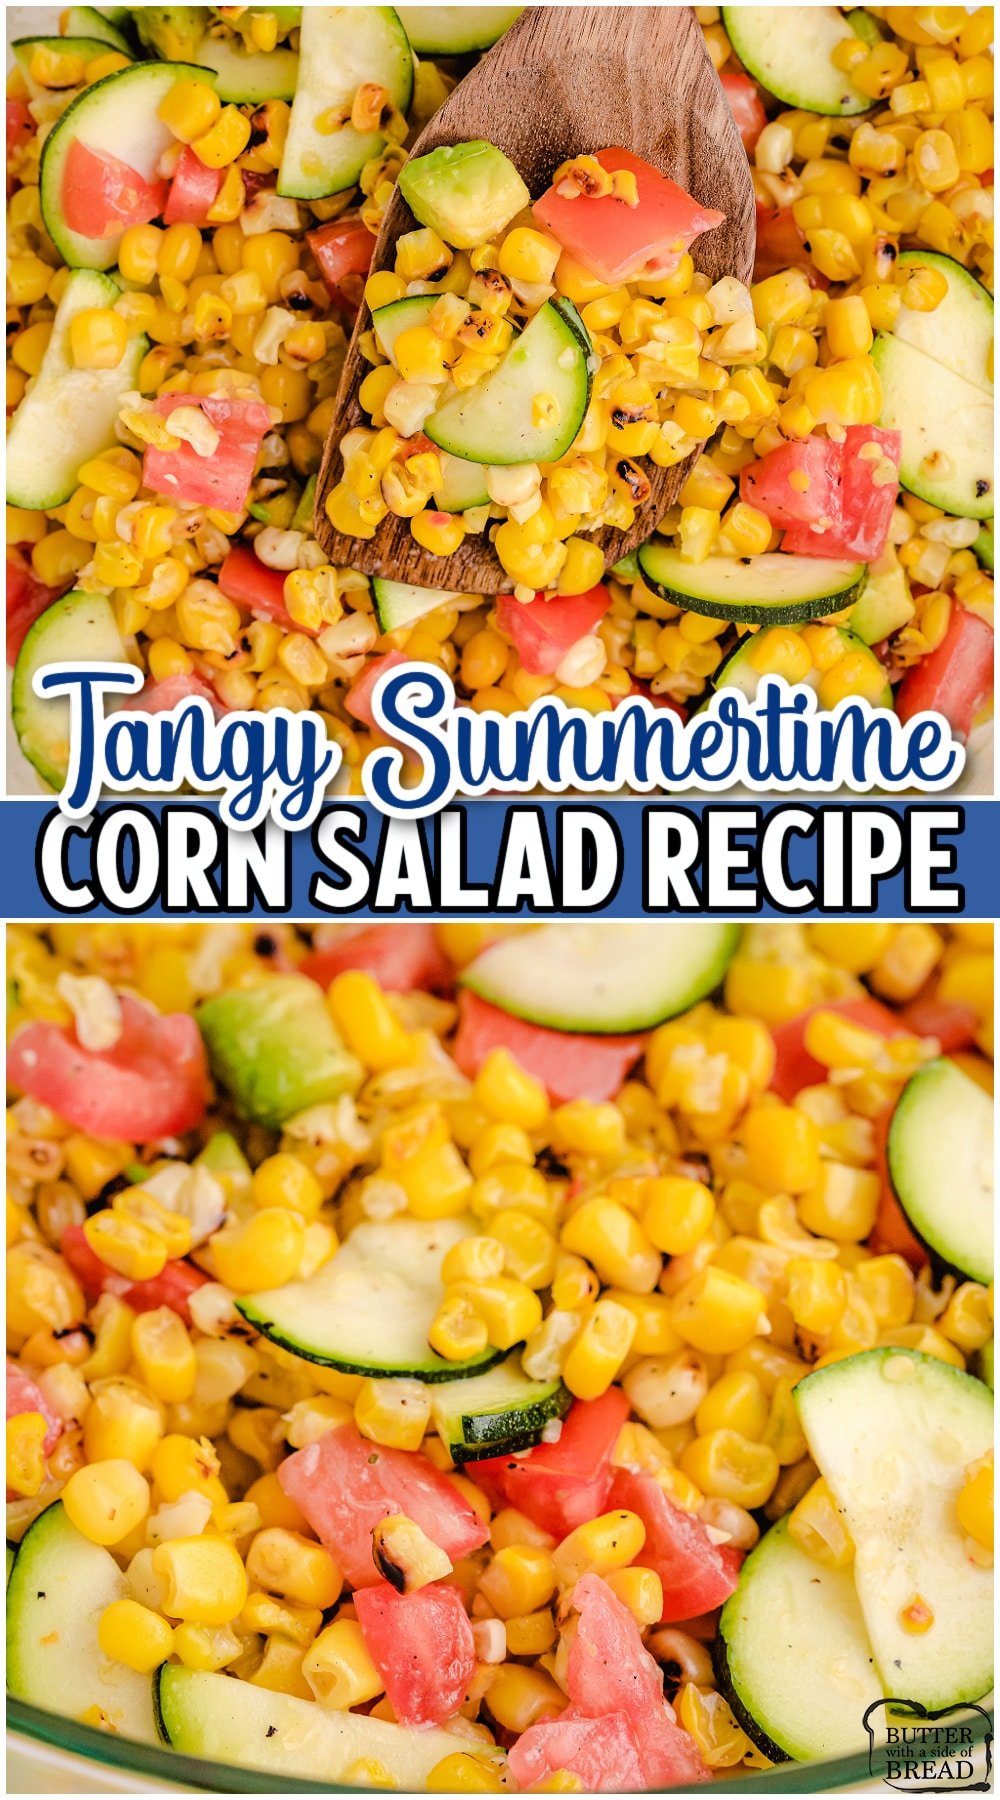 Easy Summer Corn Salad made with fresh produce & perfect for those hot summer days! This corn salad with Italian dressing is simple, yet flavorful & goes well with grilled chicken & steak.